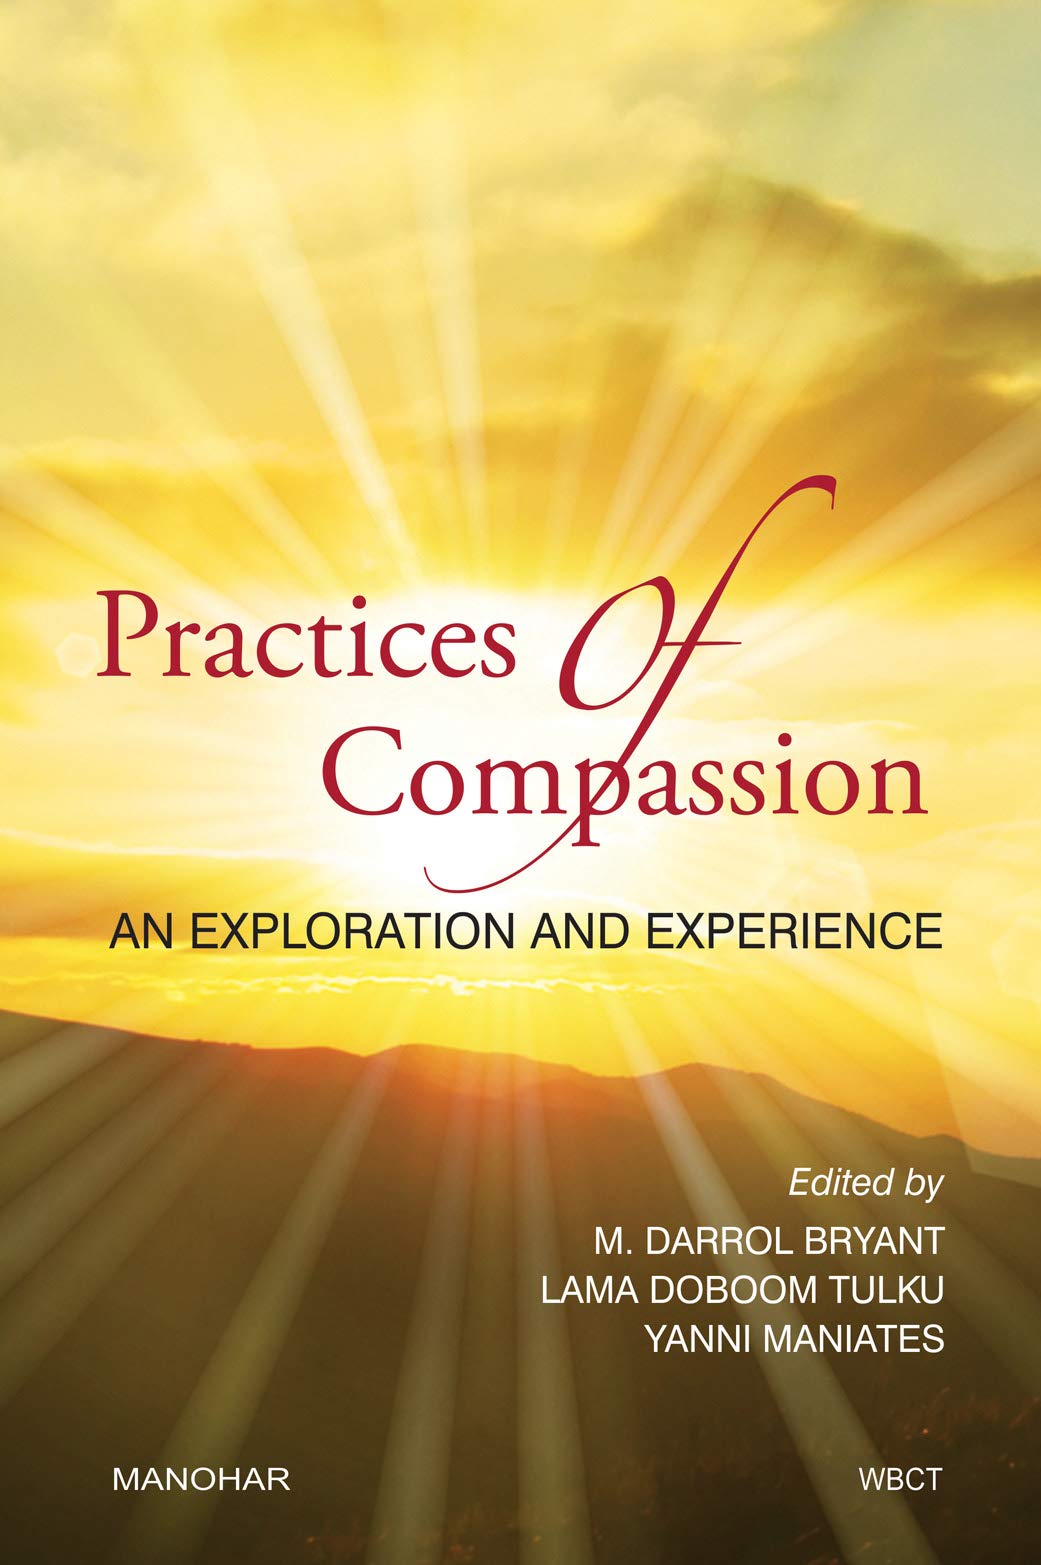 PRACTICES OF COMPASSION: AN EXPLORATION AND EXPERIENCE